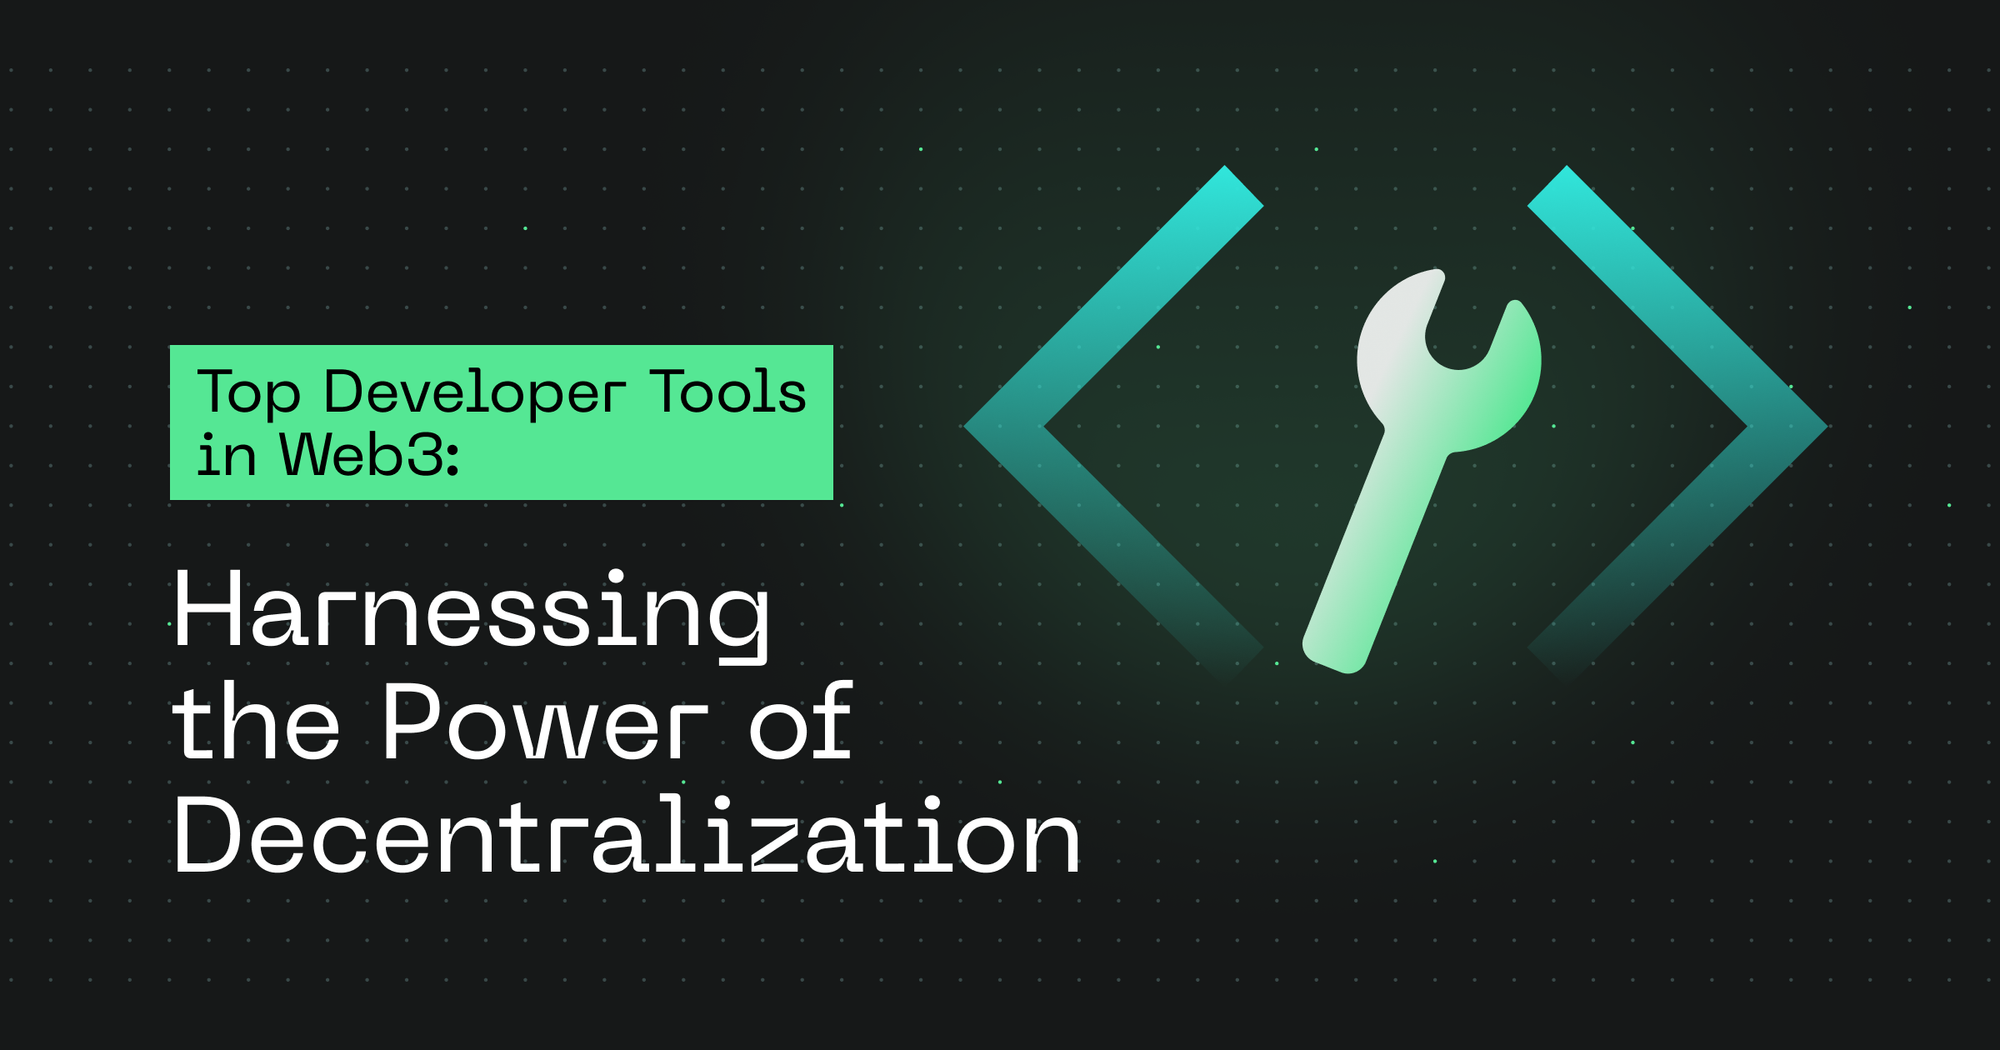 Top Developer Tools in Web3: Harnessing the Power of Decentralization